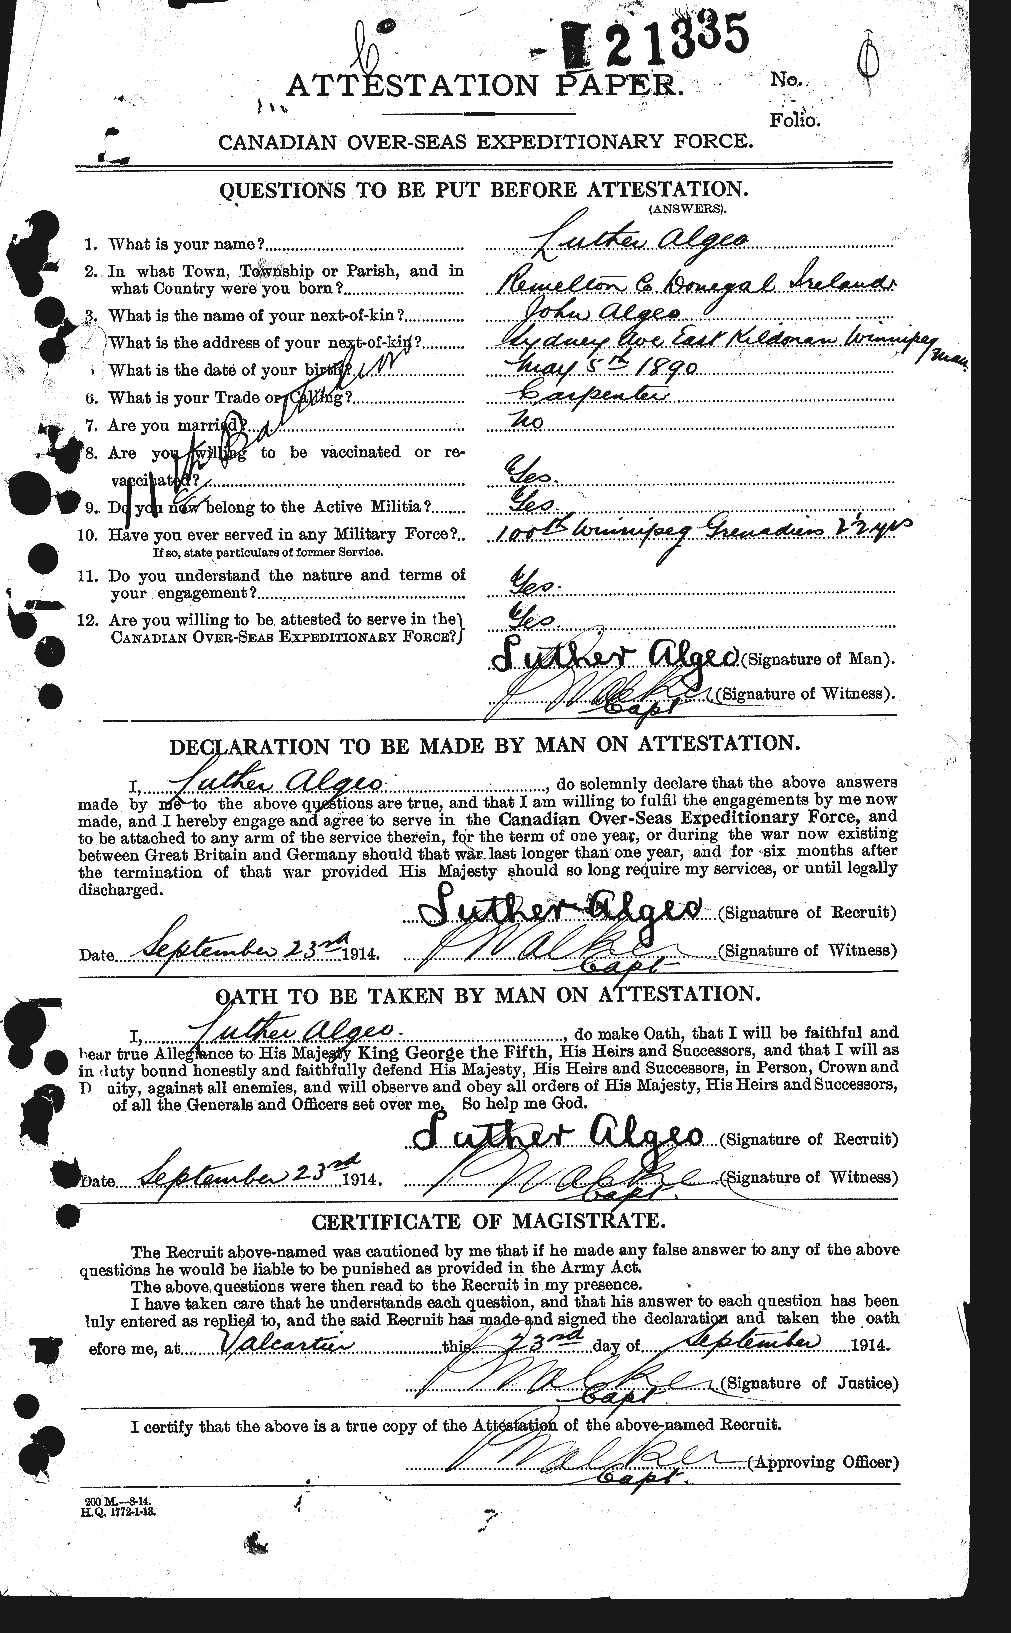 Personnel Records of the First World War - CEF 205043a